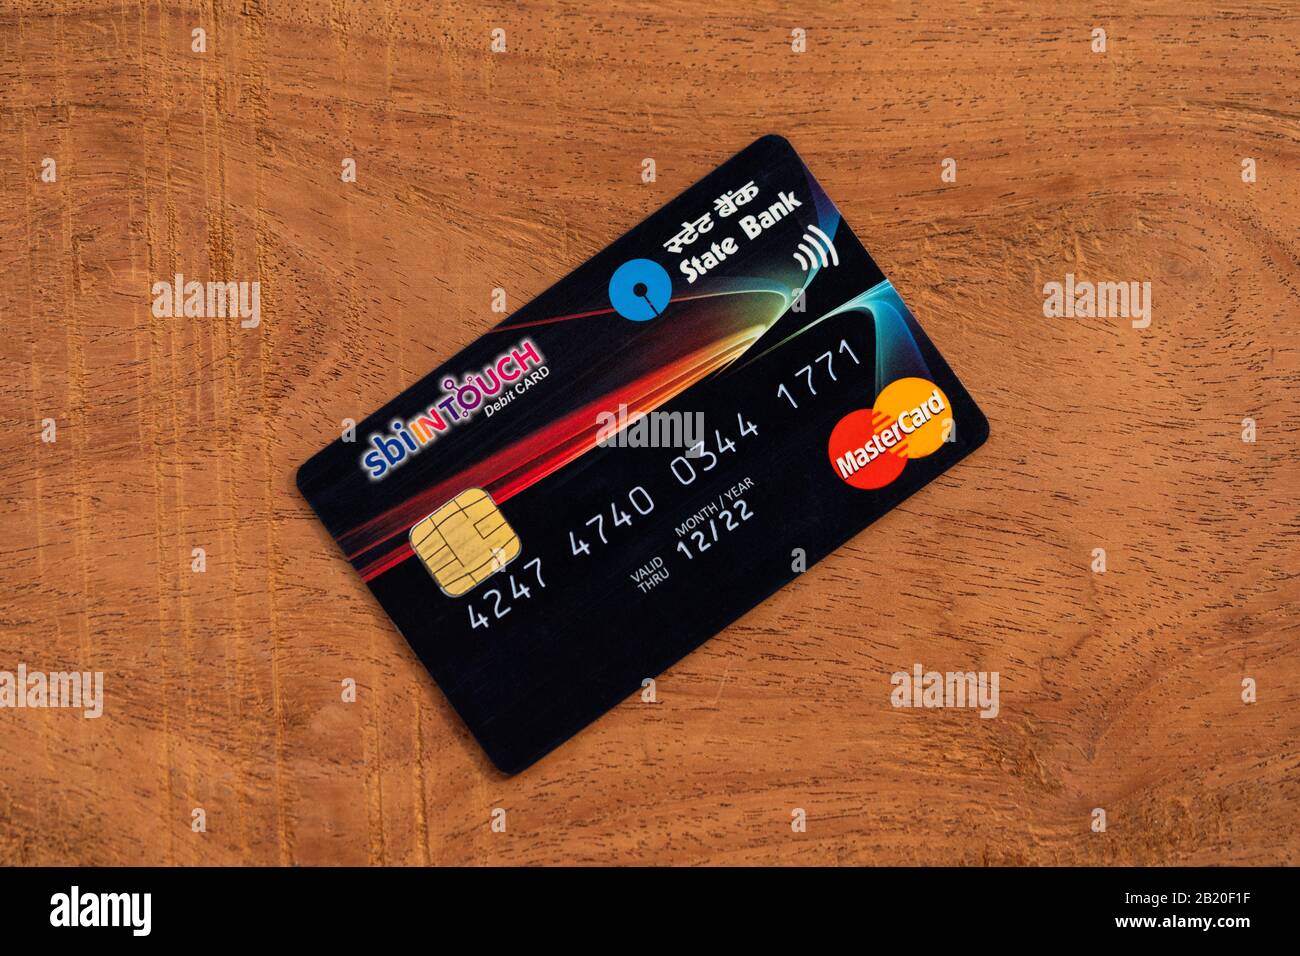 SBI master card top view on wooden background with copy space. Concept for Indian economy, IPO, banking, debit or credit card business, share market, Stock Photo